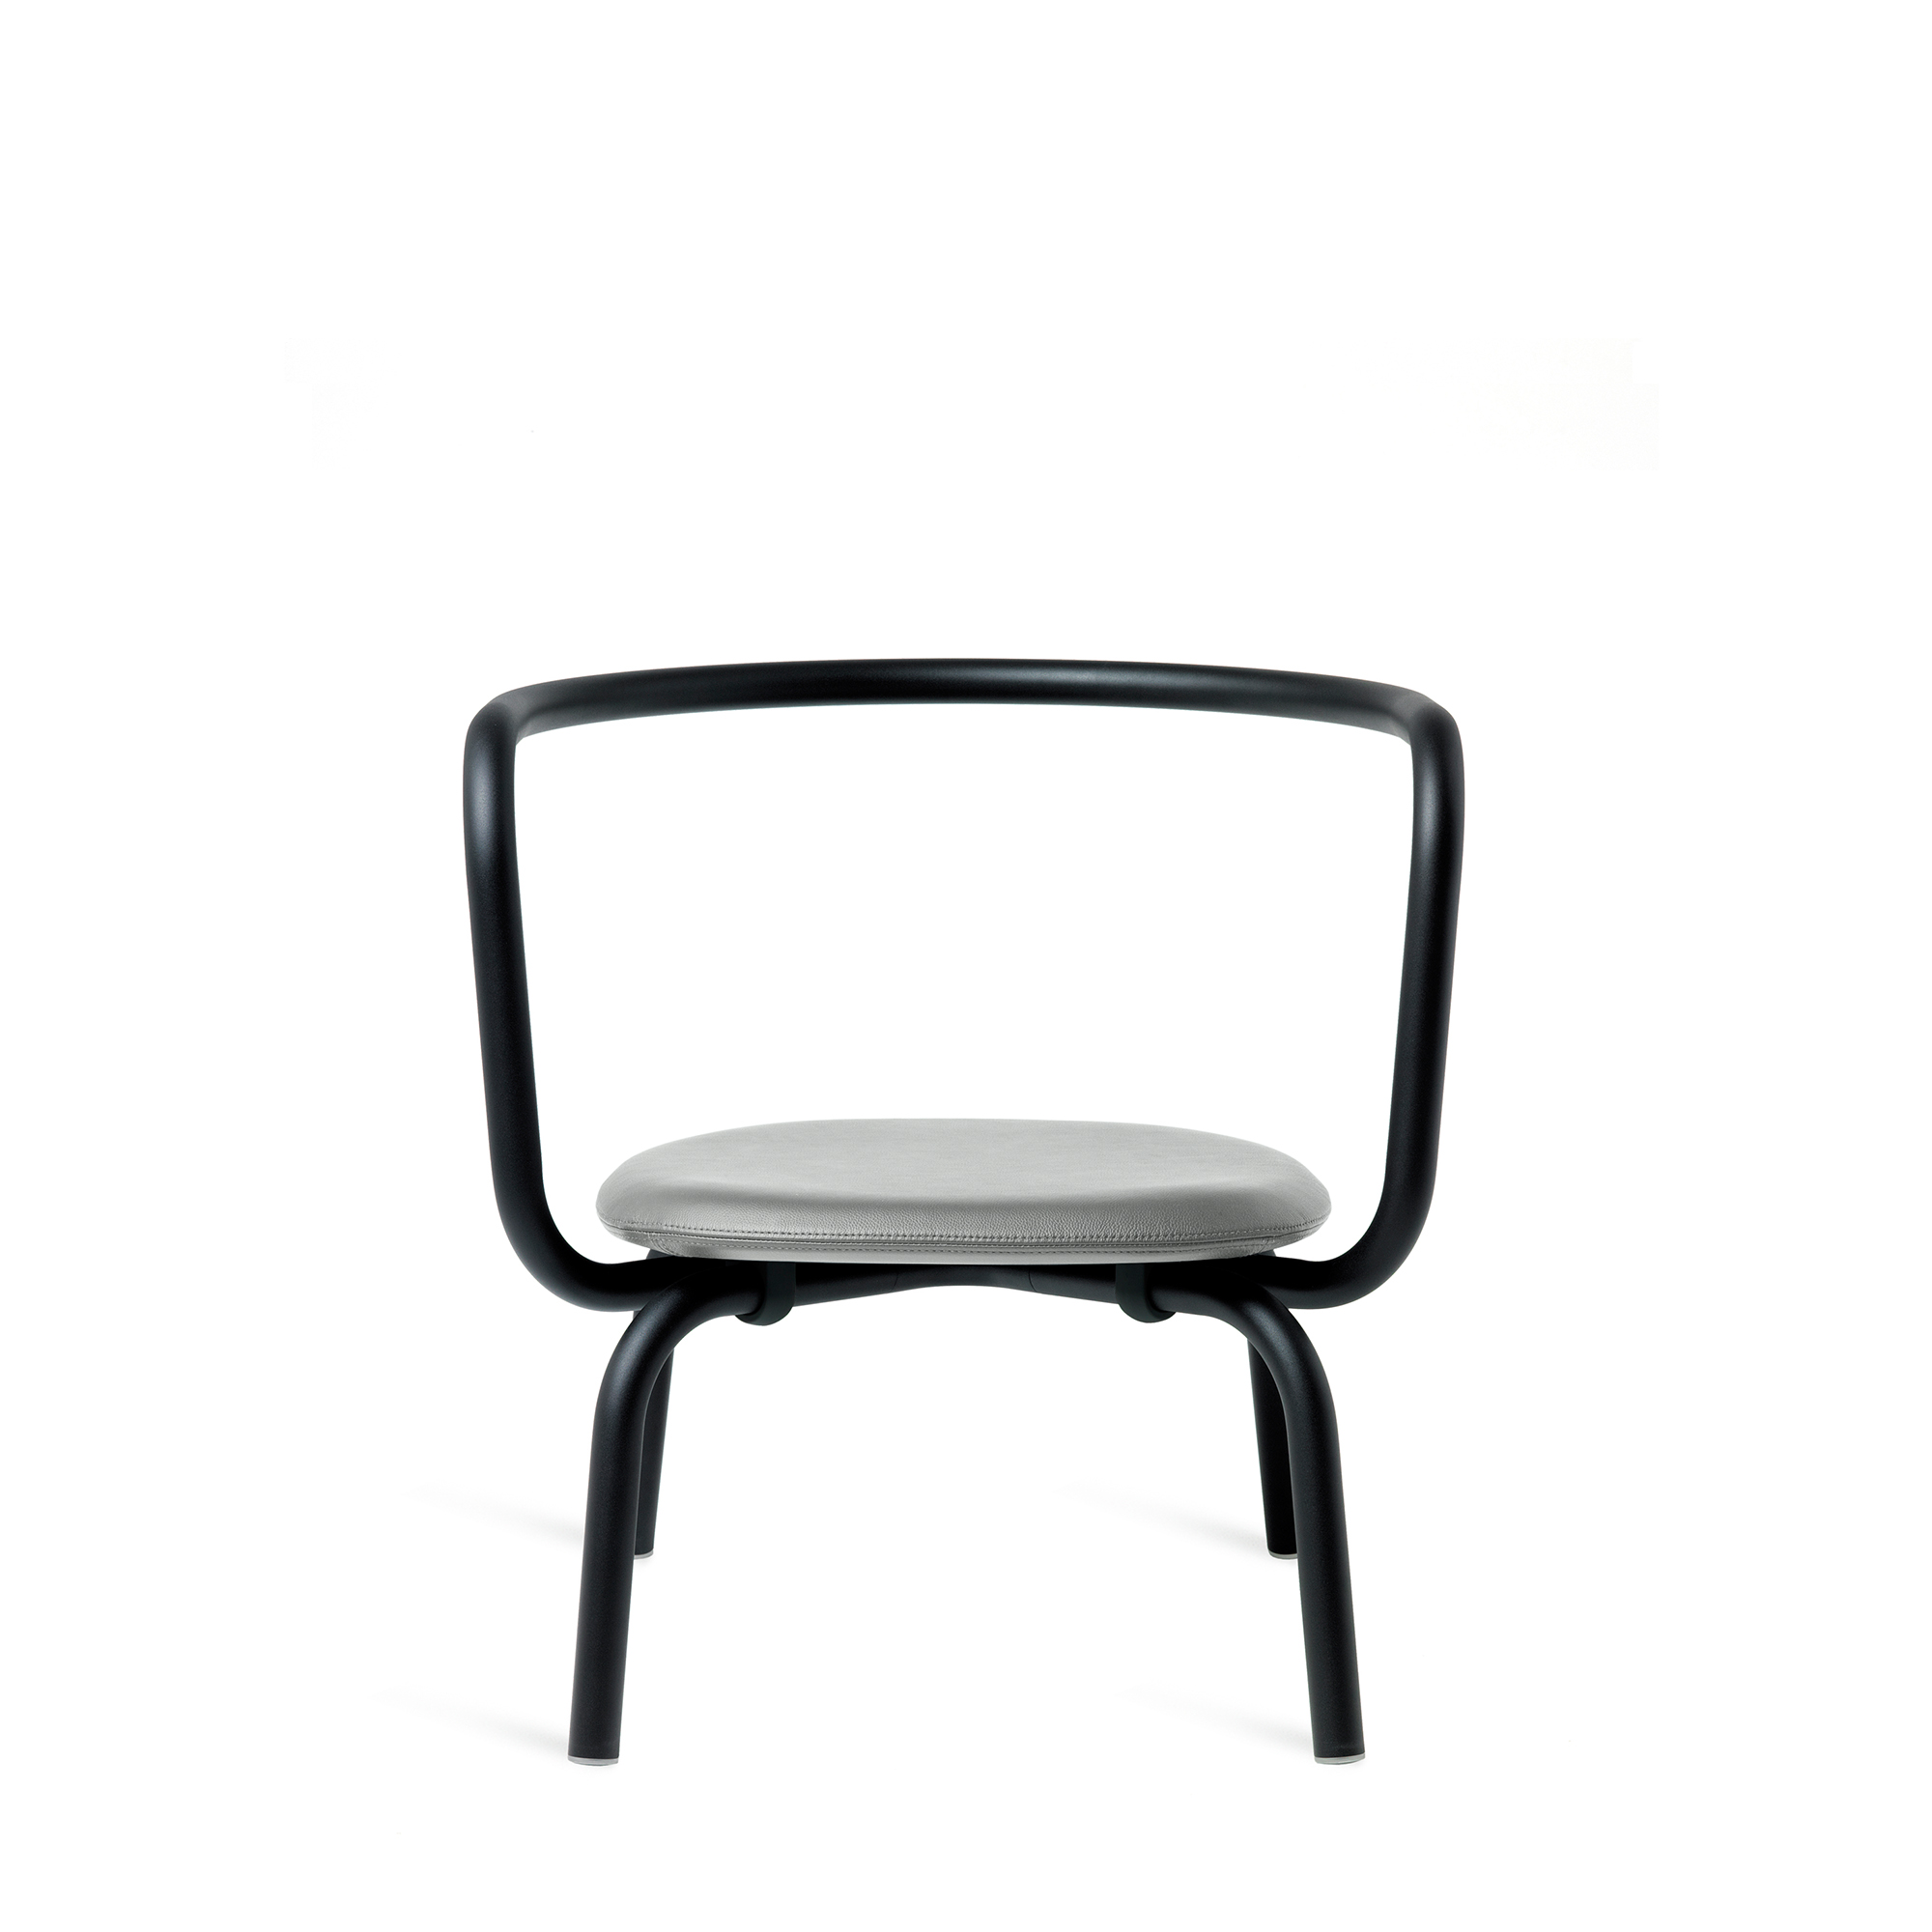 Parrish Aluminum Lounge Chair by Konstantin Grcic